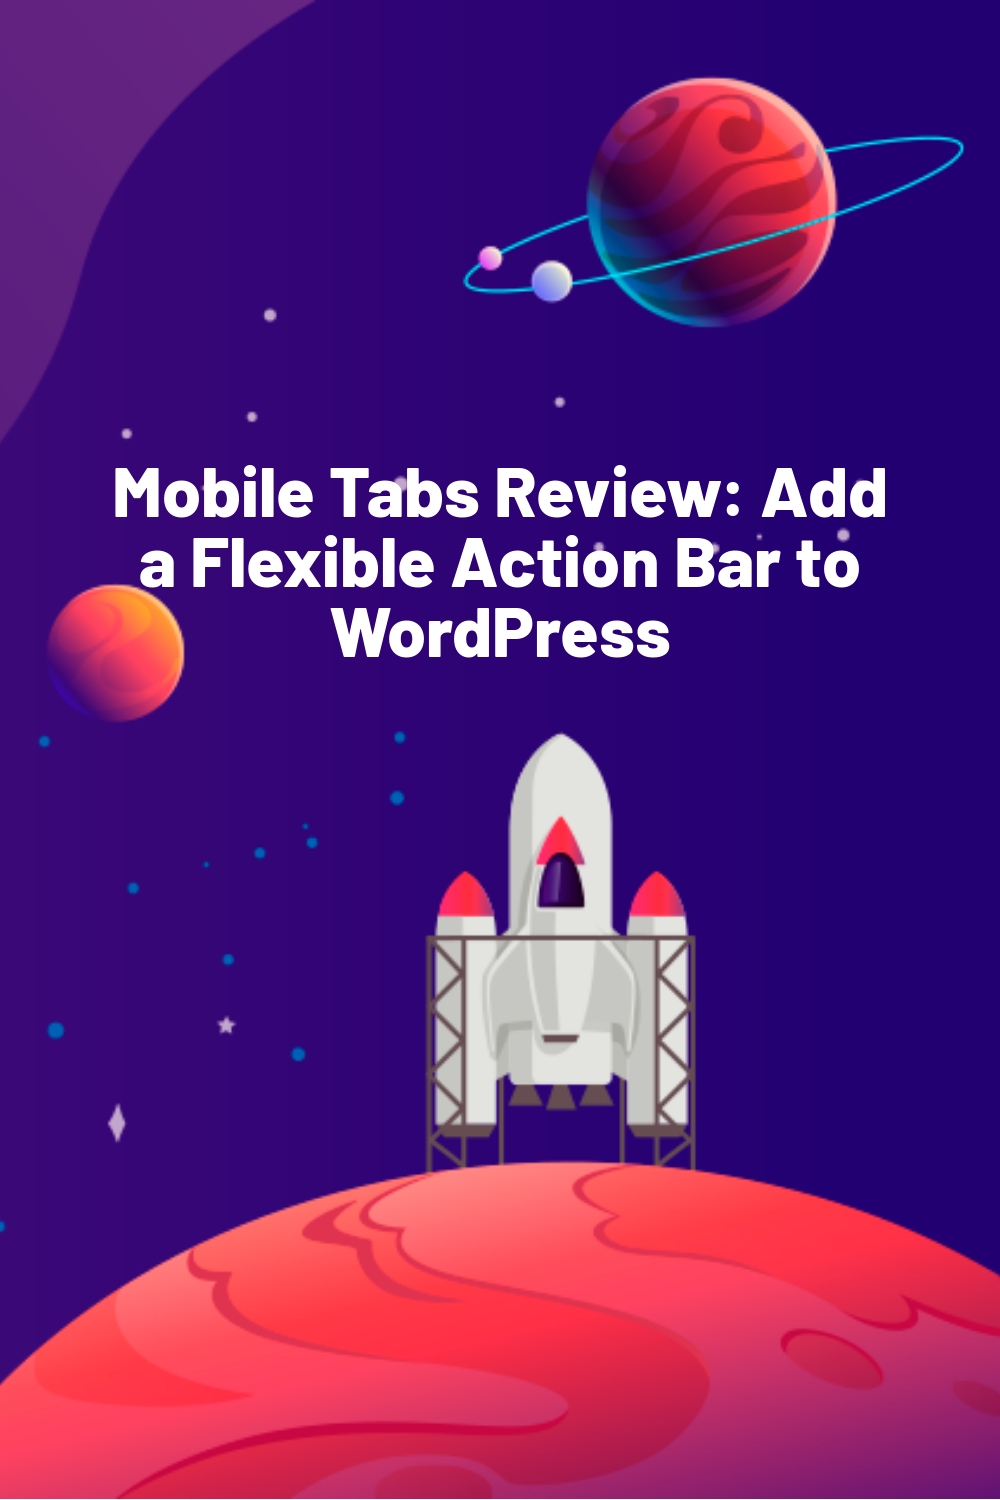 Mobile Tabs Review: Add a Flexible Action Bar to WordPress